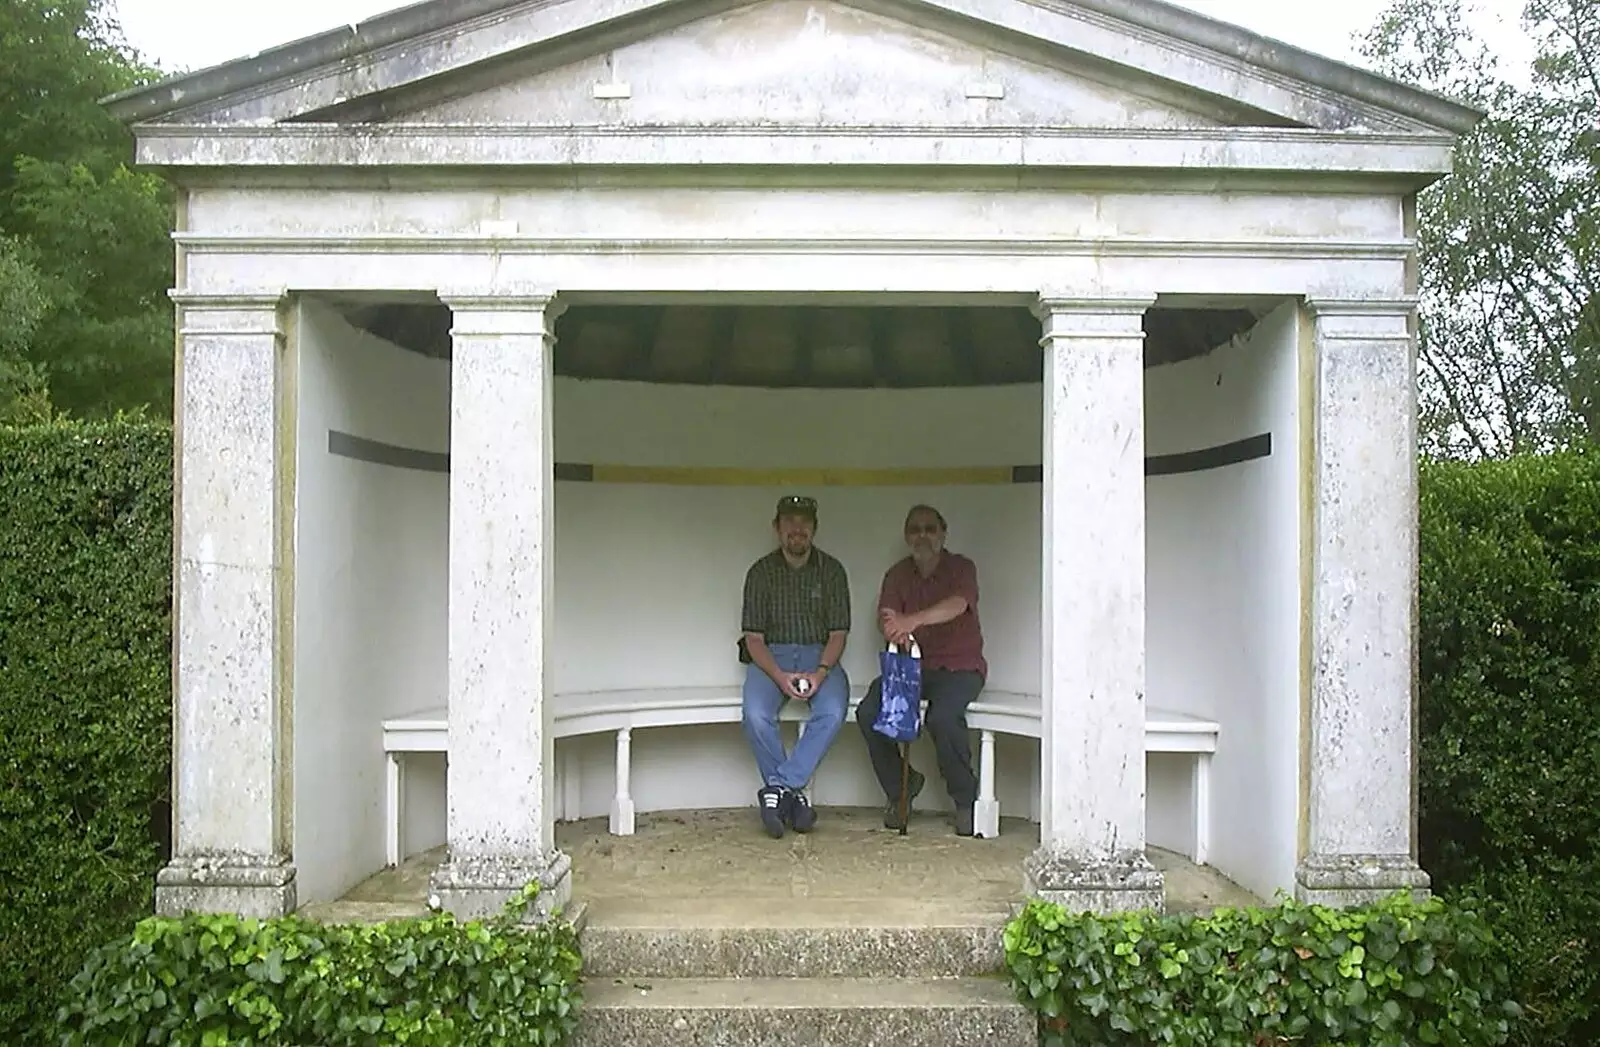 Dave and Robbie on a stone bench, from A Trip to Ickworth House, Horringer, Suffolk - 22nd August 2004